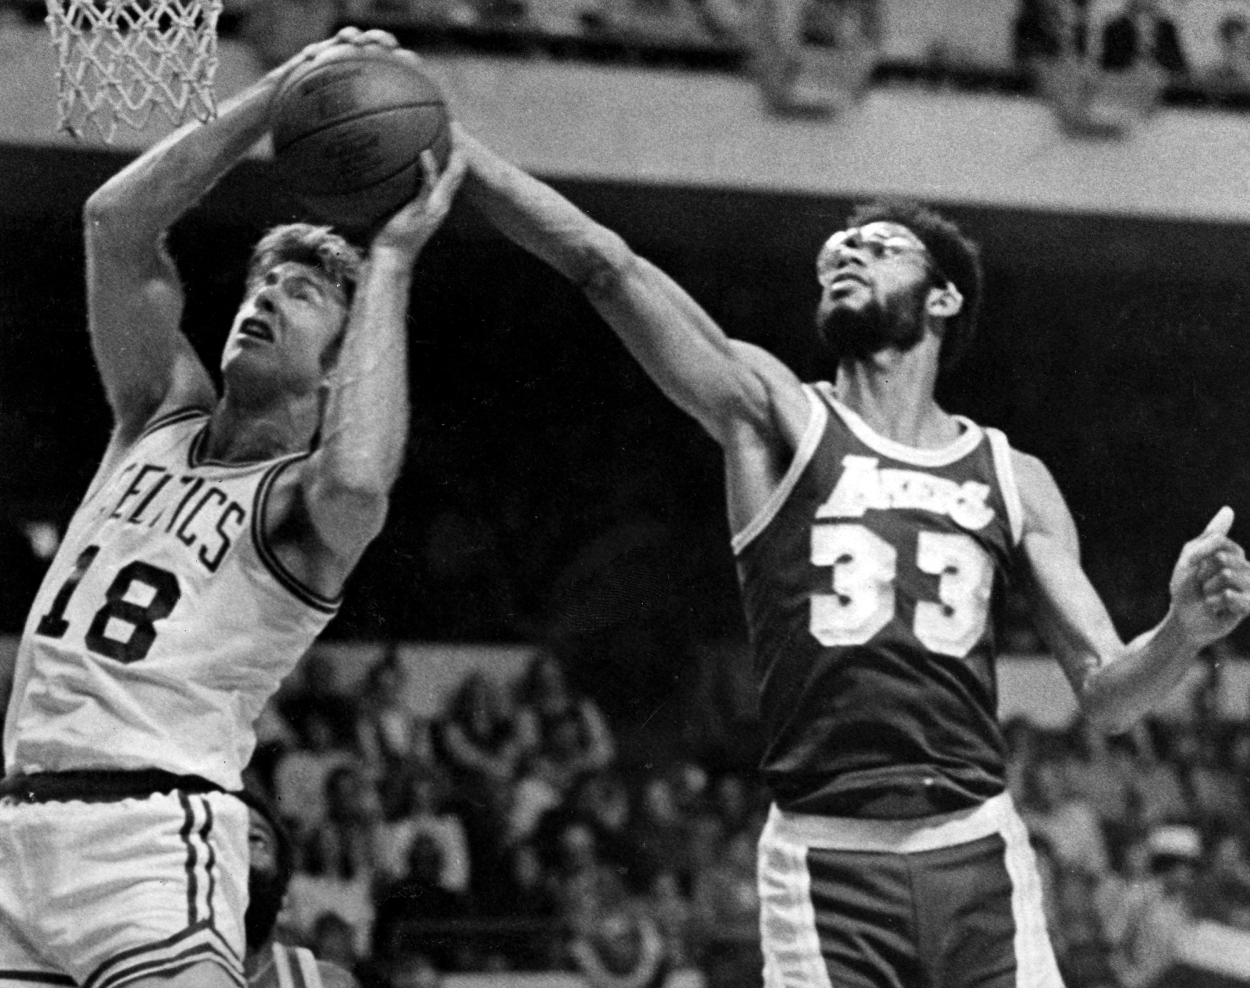 Los Angeles Lakers center Kareem Abdul-Jabbar, right, attempts to block a shot from Boston Celtics Dave Cowens.